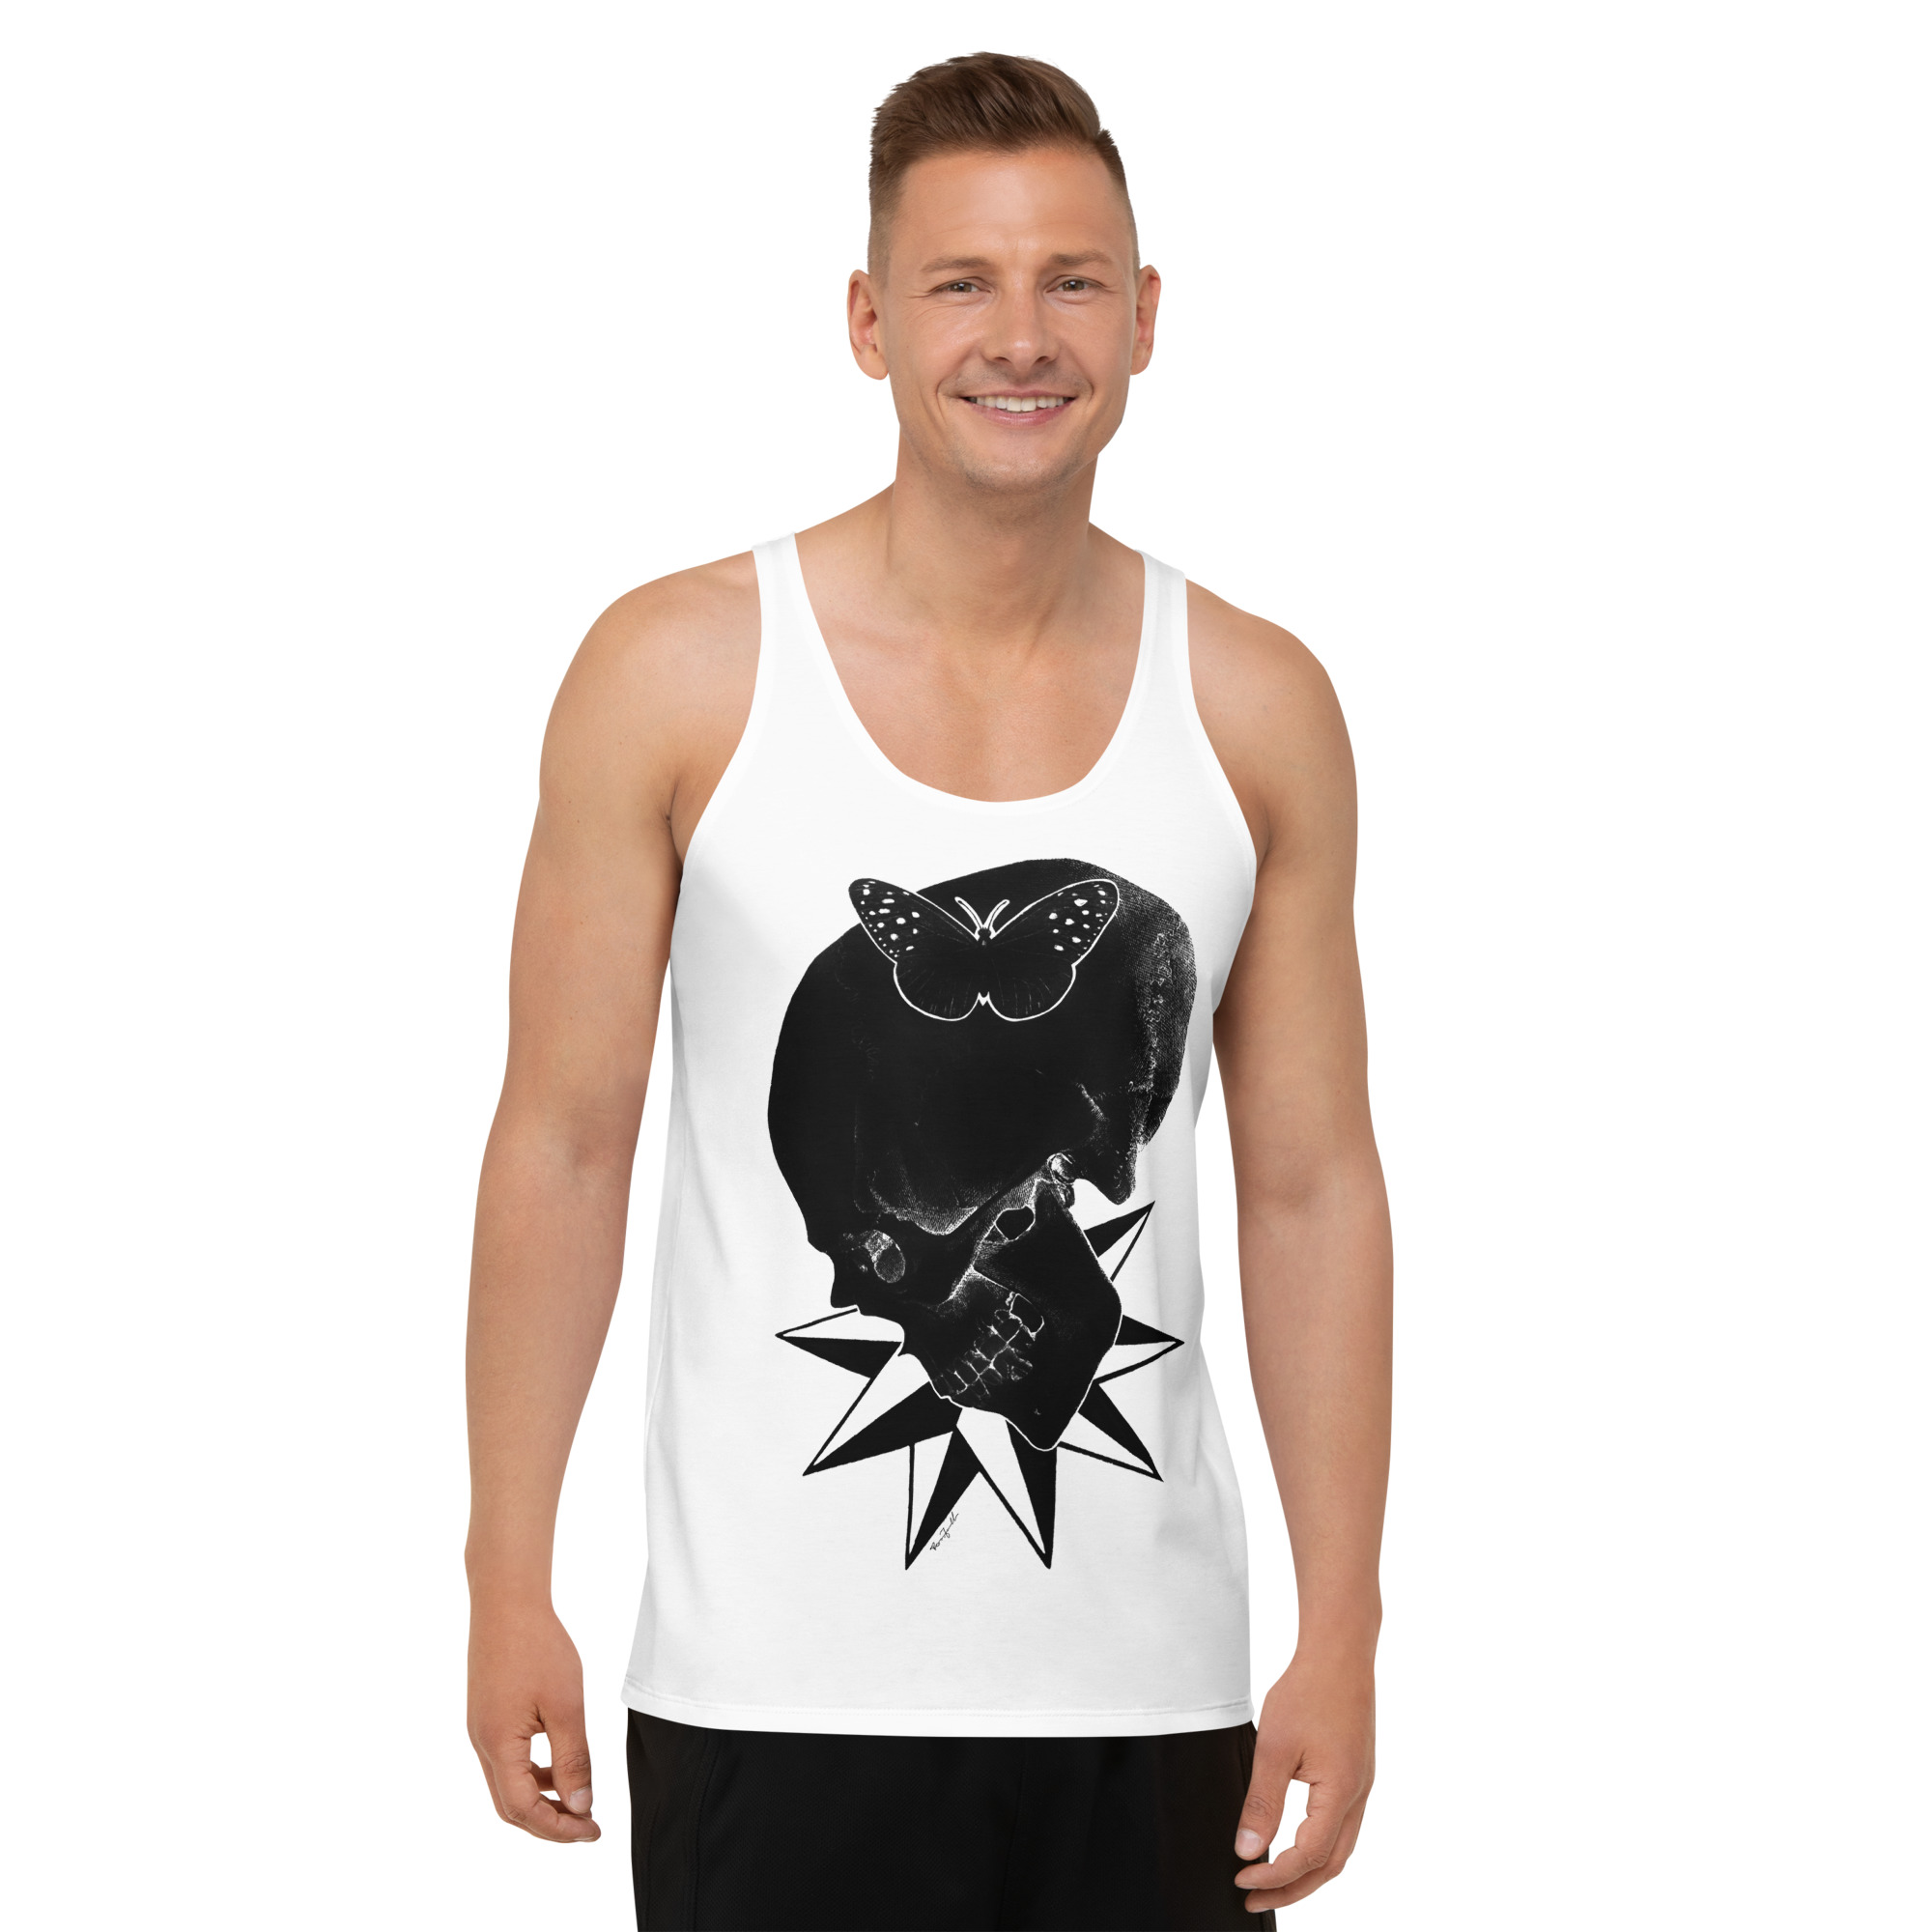 all-over-print-mens-tank-top-white-front-63864c32402c1.jpg